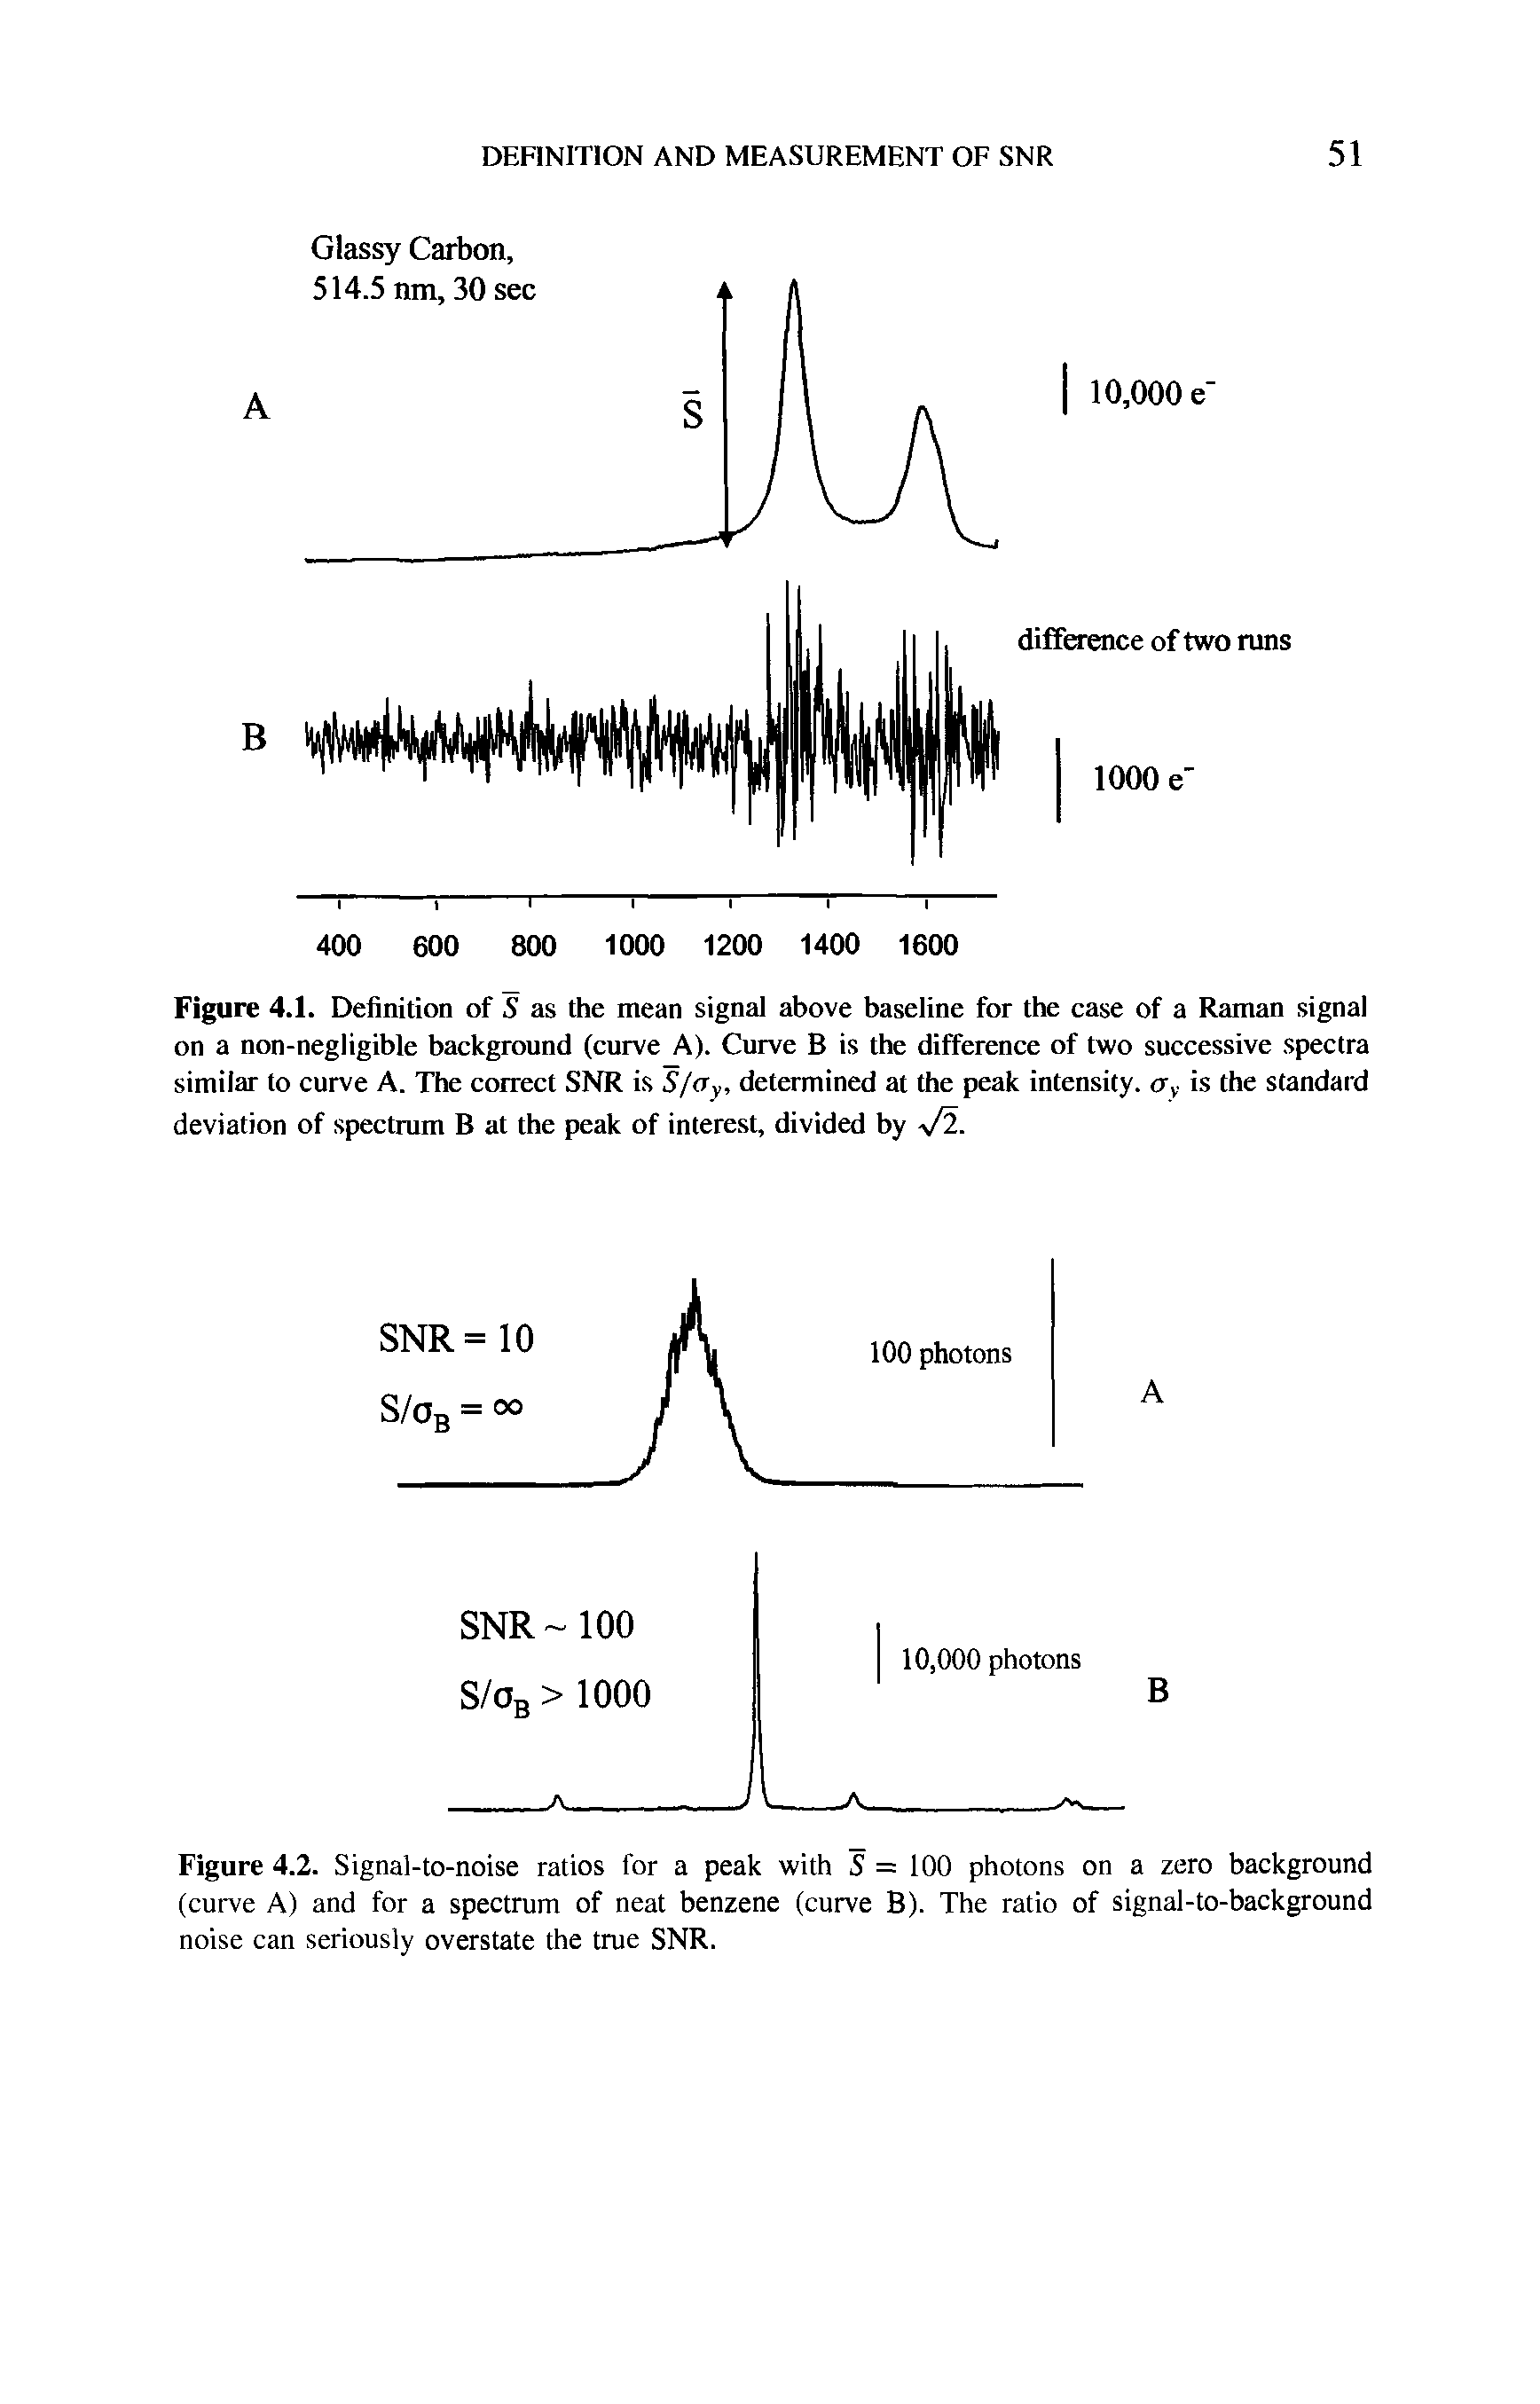 Figure 4.1. Definition of S as the mean signal above baseline for the case of a Raman signal on a non-negligible background (curve A). Curve B is the difference of two successive spectra similar to curve A. The correct SNR is S/ay, determined at the peak intensity. <7, is the standard deviation of spectrum B at the peak of interest, divided by /2.